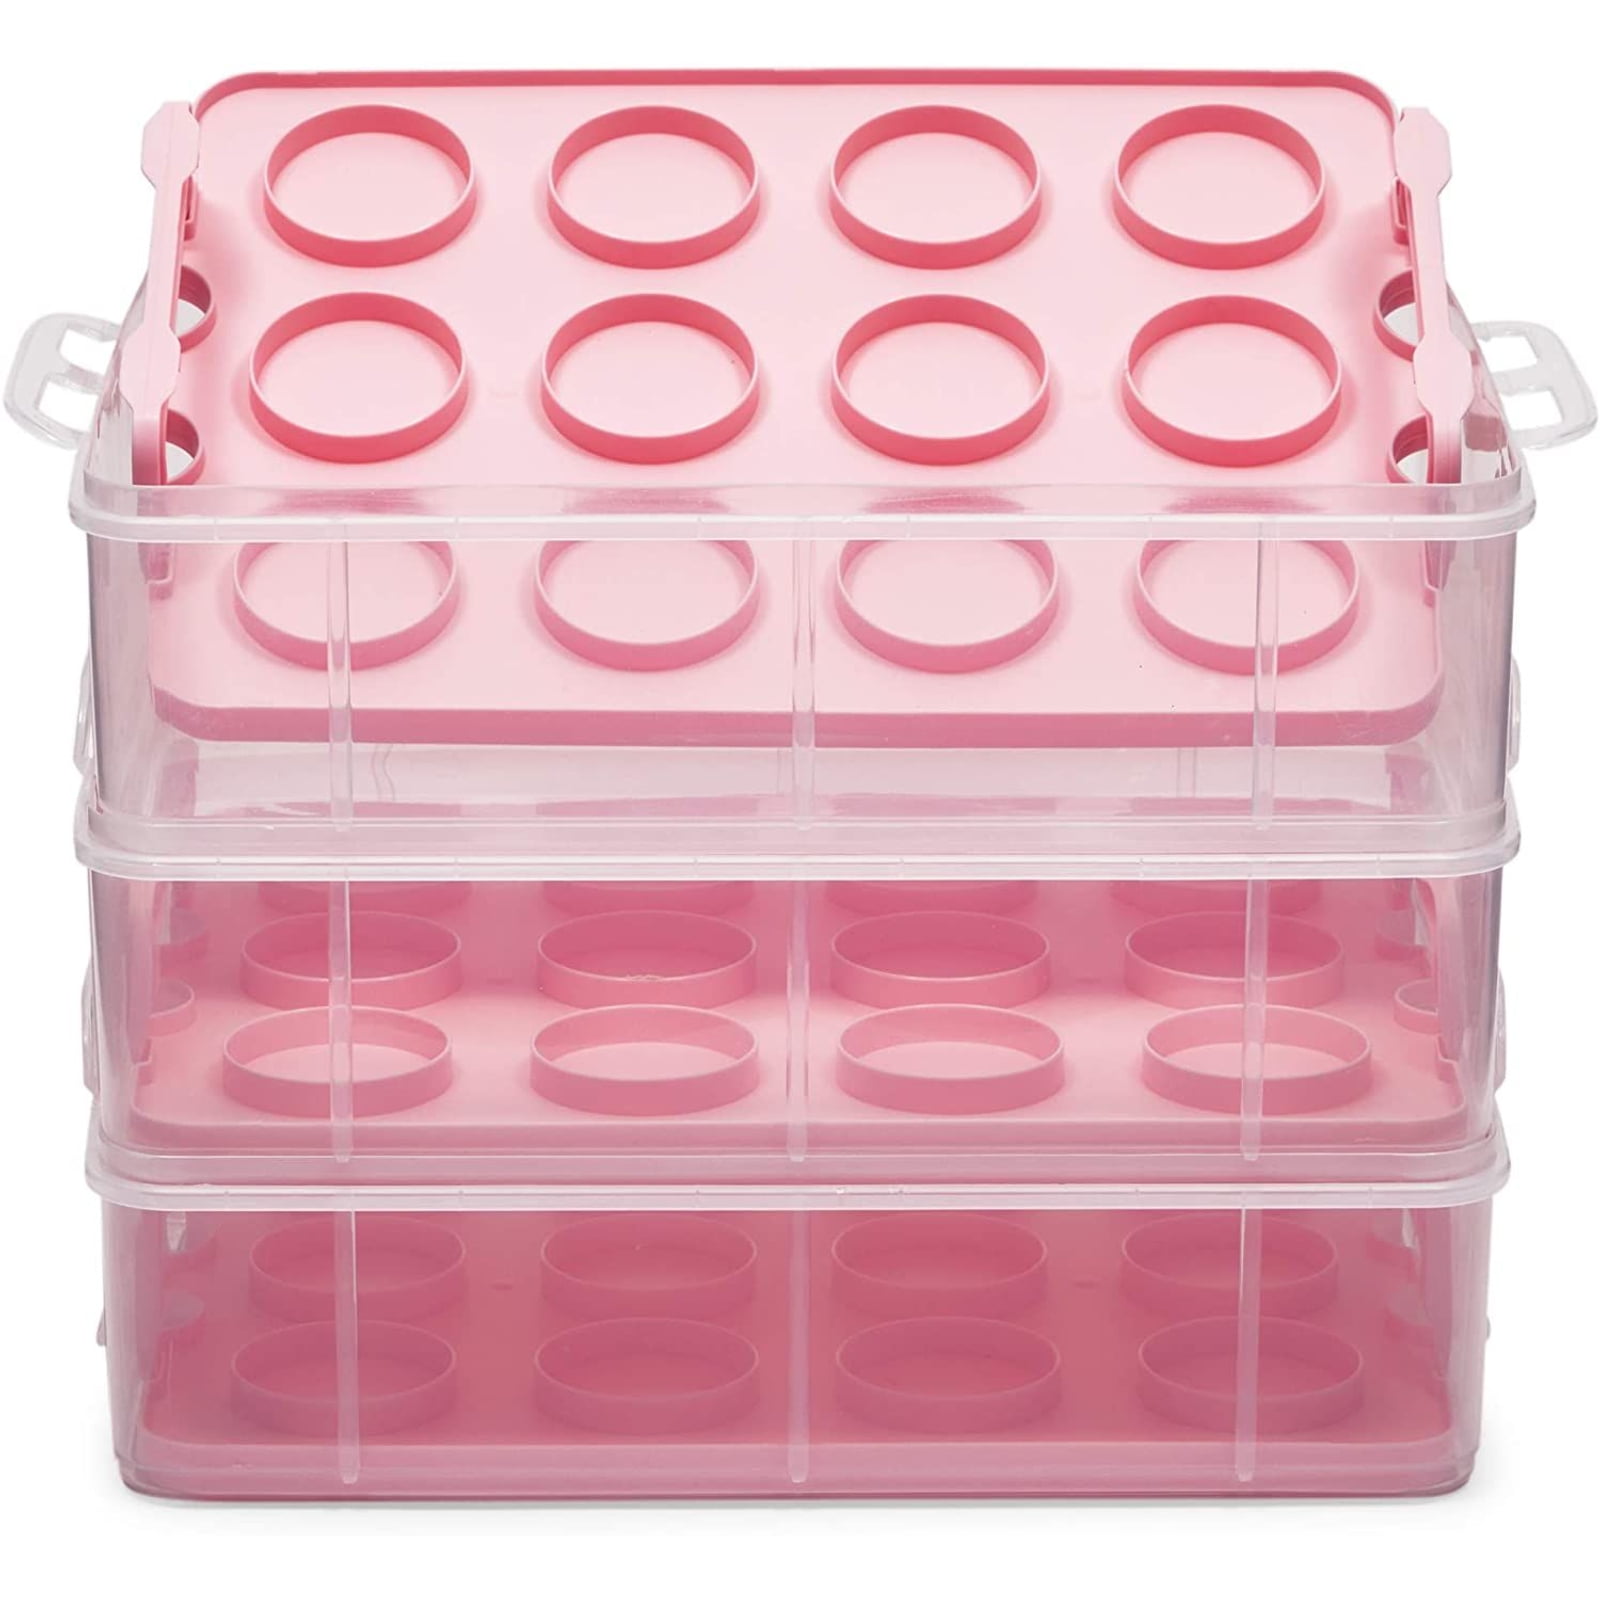 Juvale 3 Tier Cupcake Carrier with Lid and Handle, Holds 36 Cupcakes (Pink, 13.5 x 10.25 x 10.75 in)